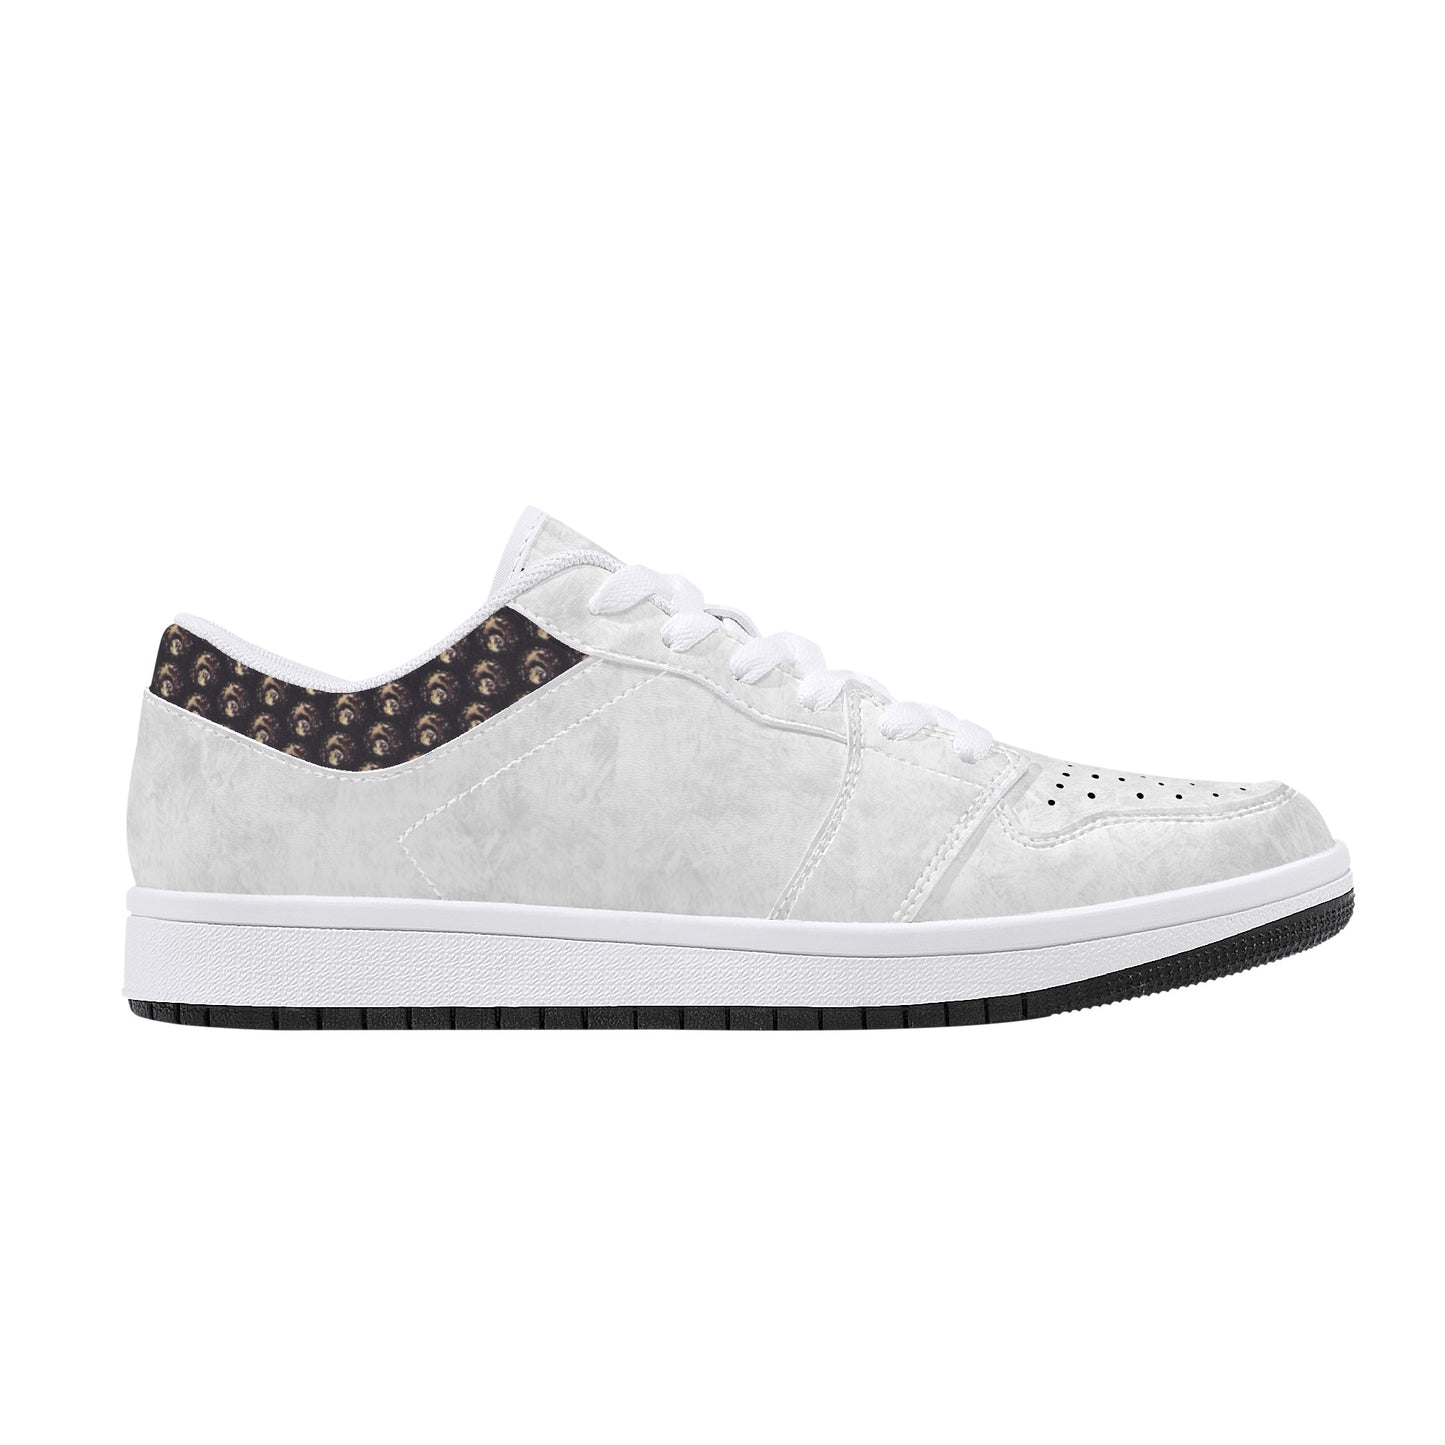 CV20YL - THE SEARCH Mens Low Top Leather Sneakers